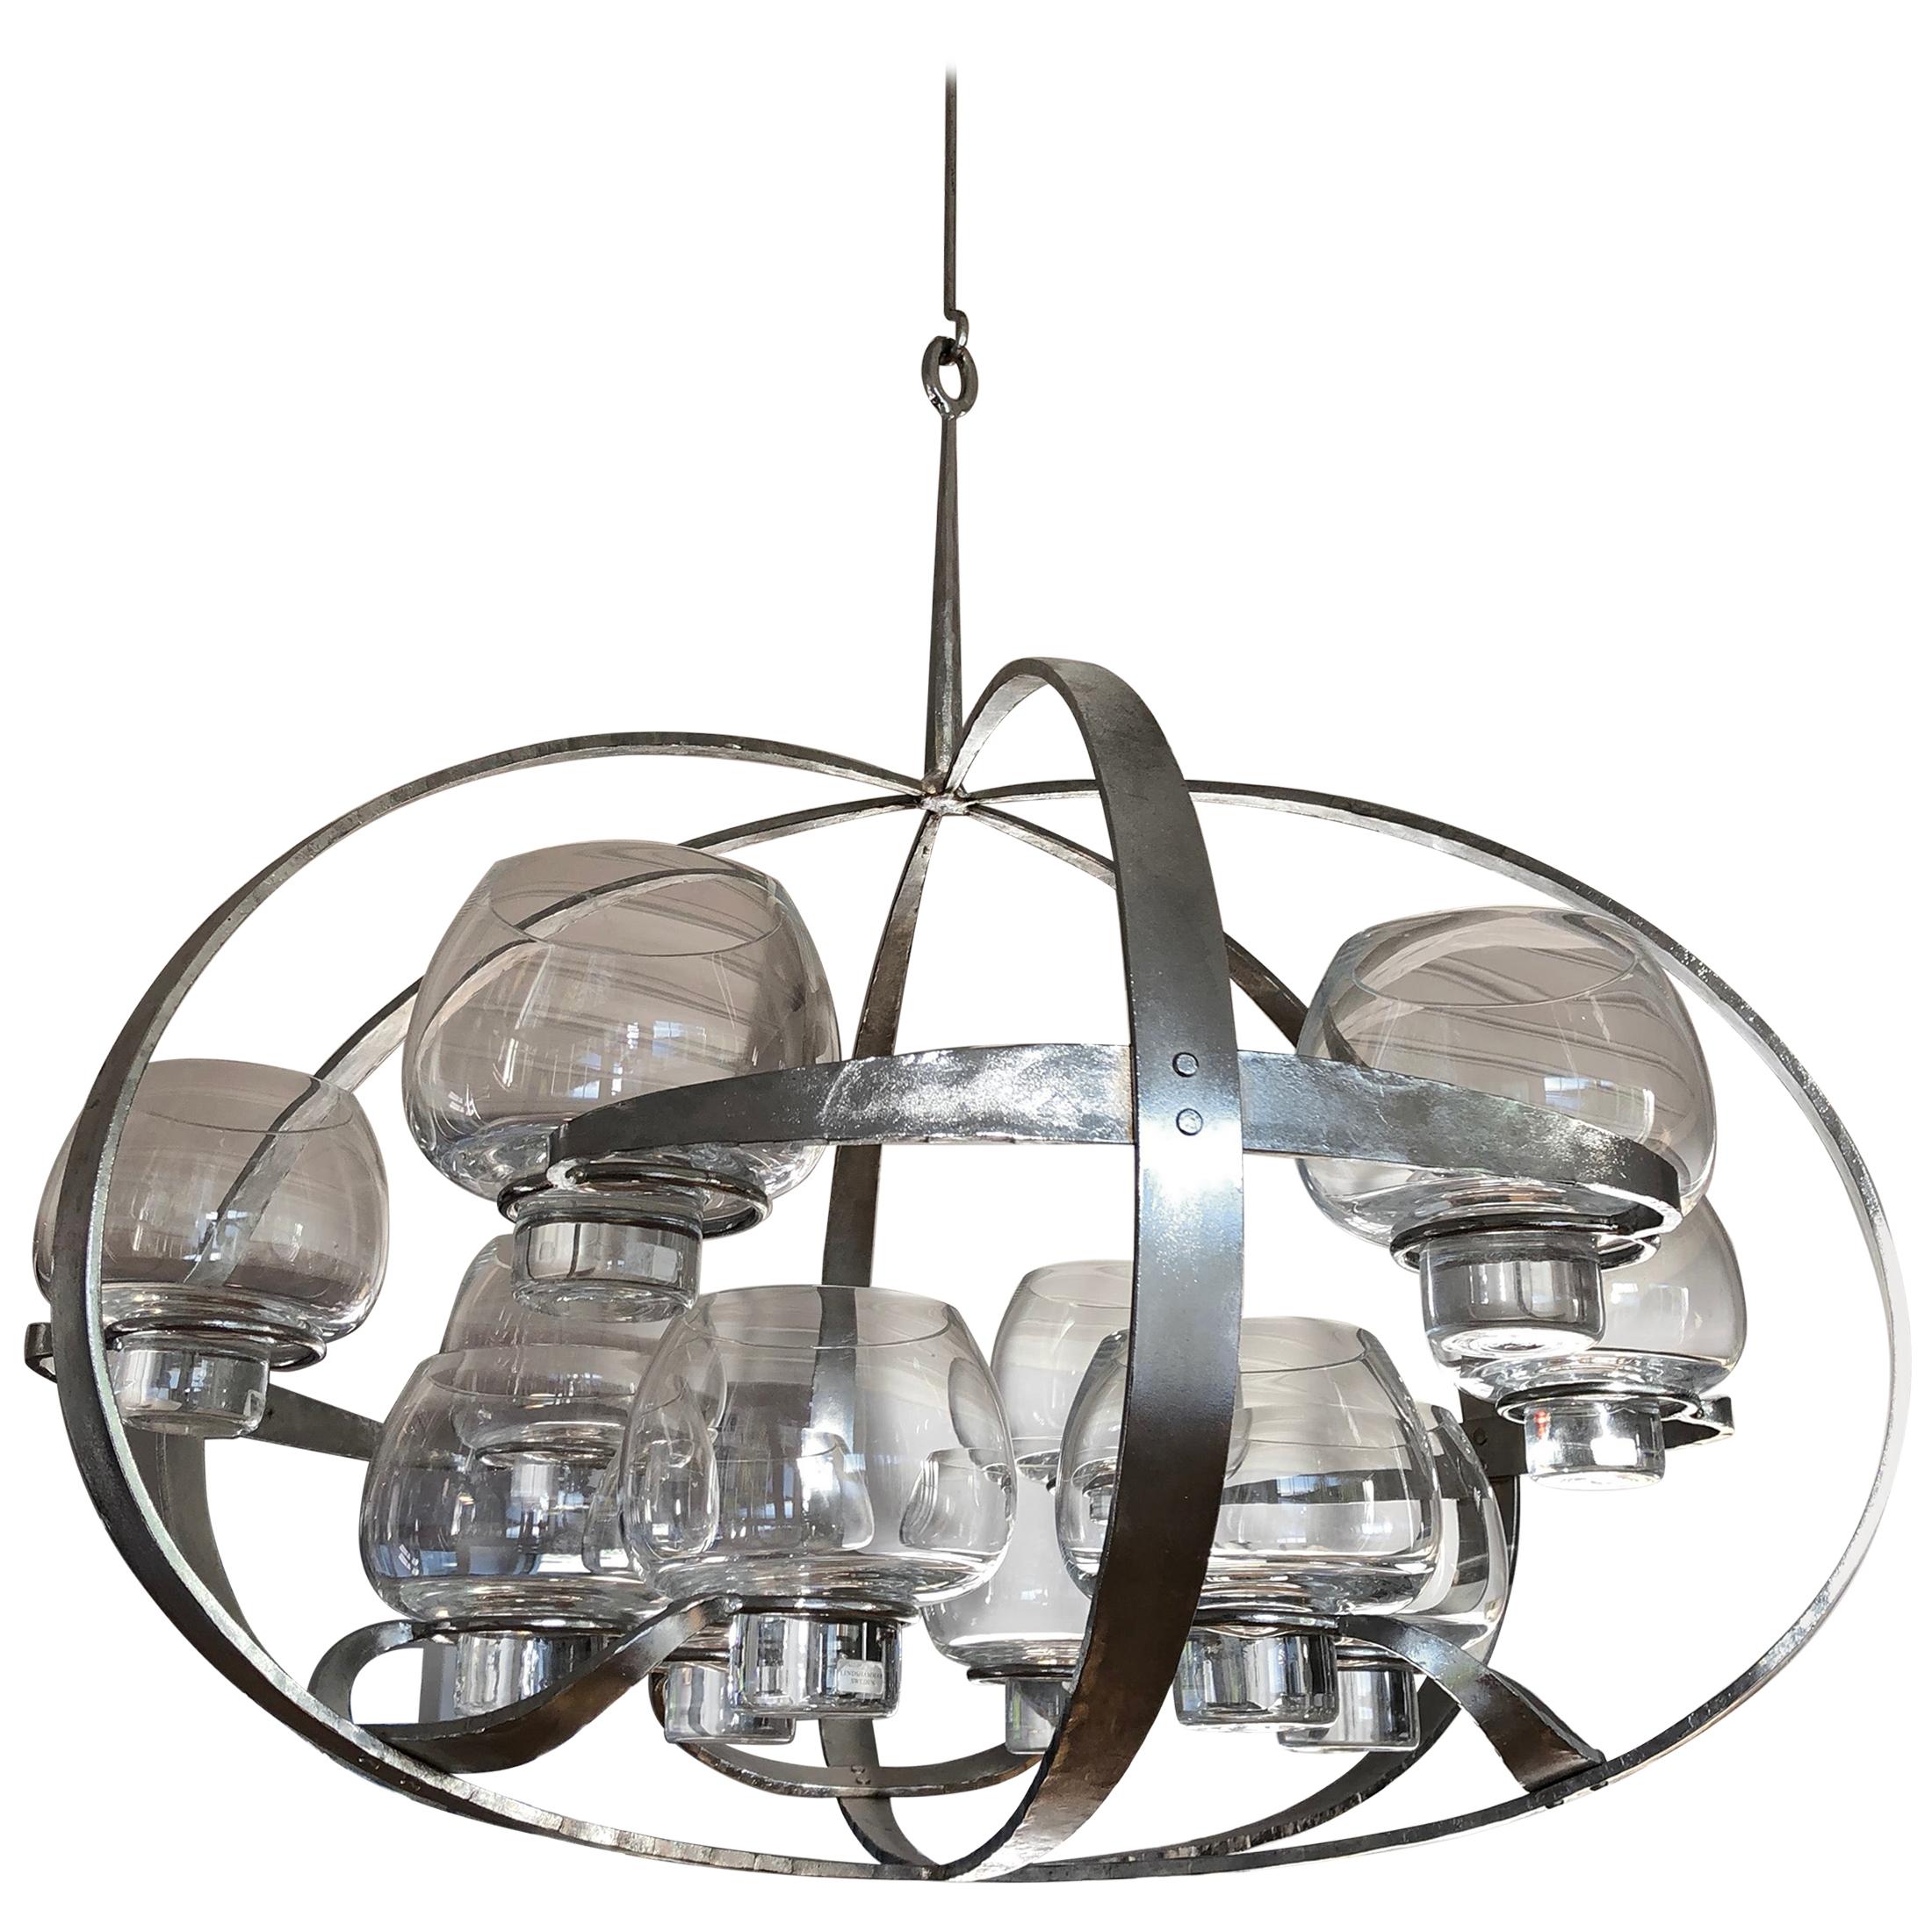 Chandelier by Erik Höglund Designed in the 1970s, Made and Signed by Lars L